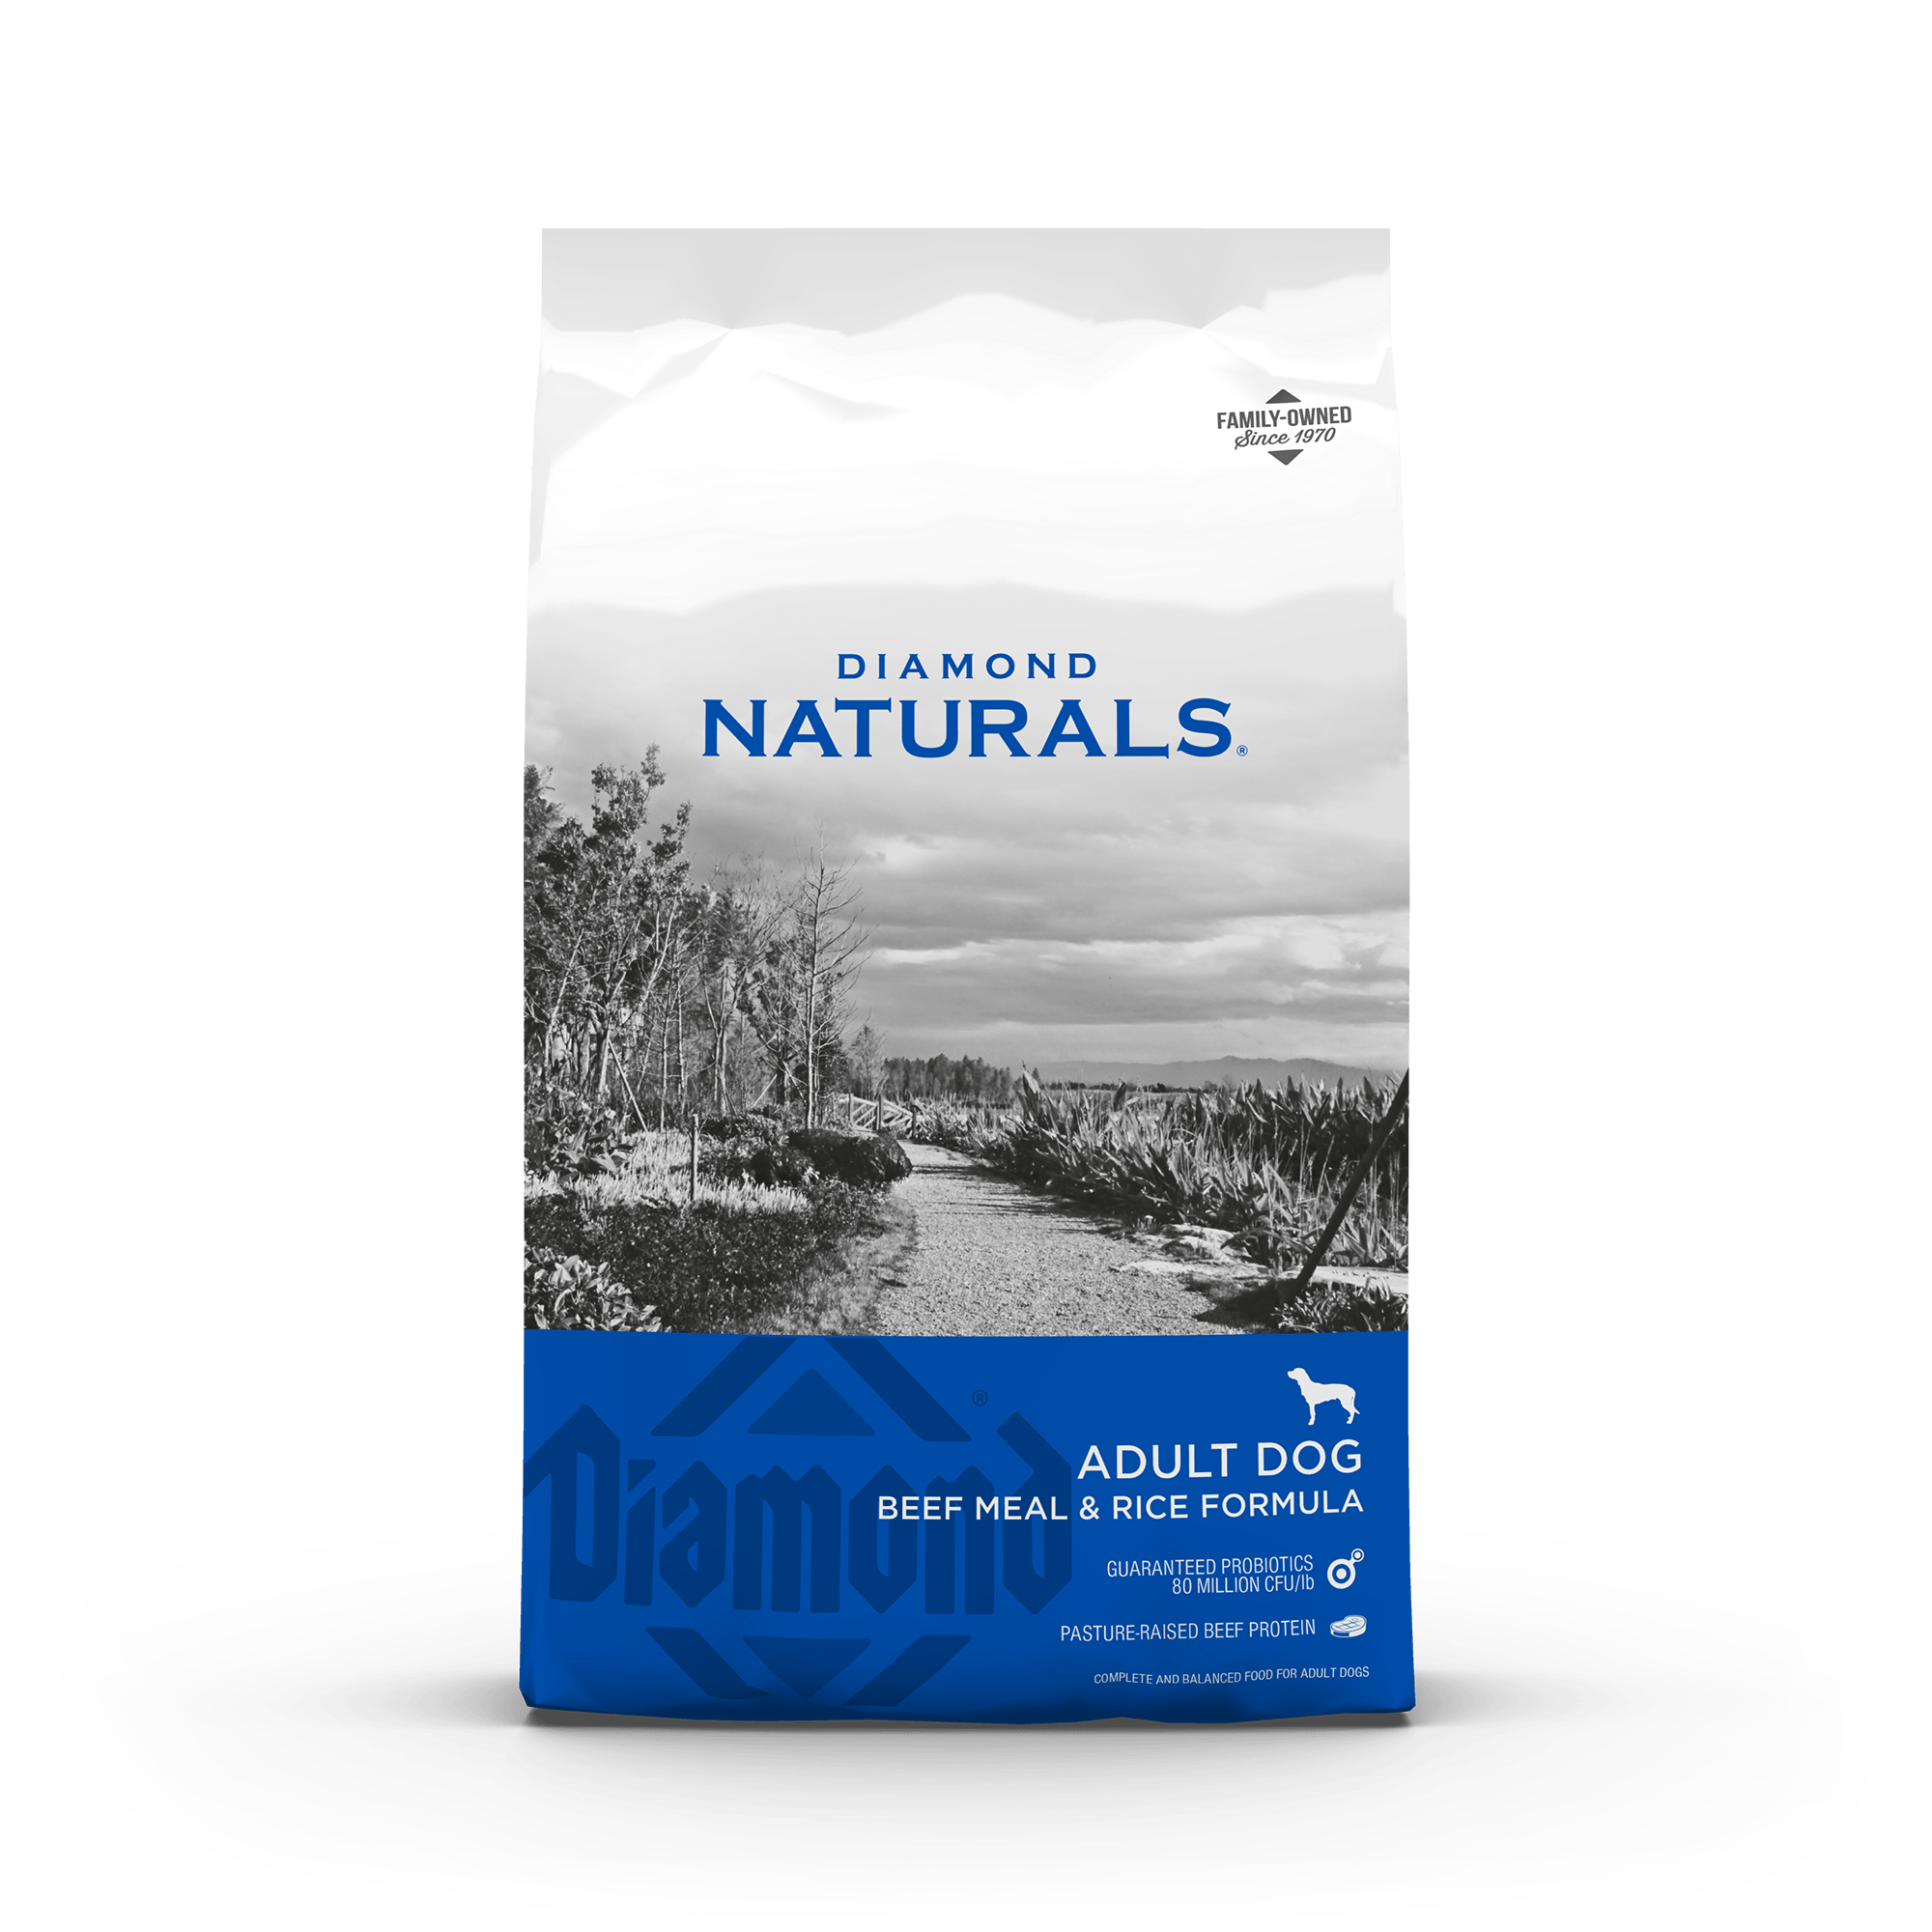 Diamond Naturals Adult Dog Beef Meal & Rice Formula product packaging